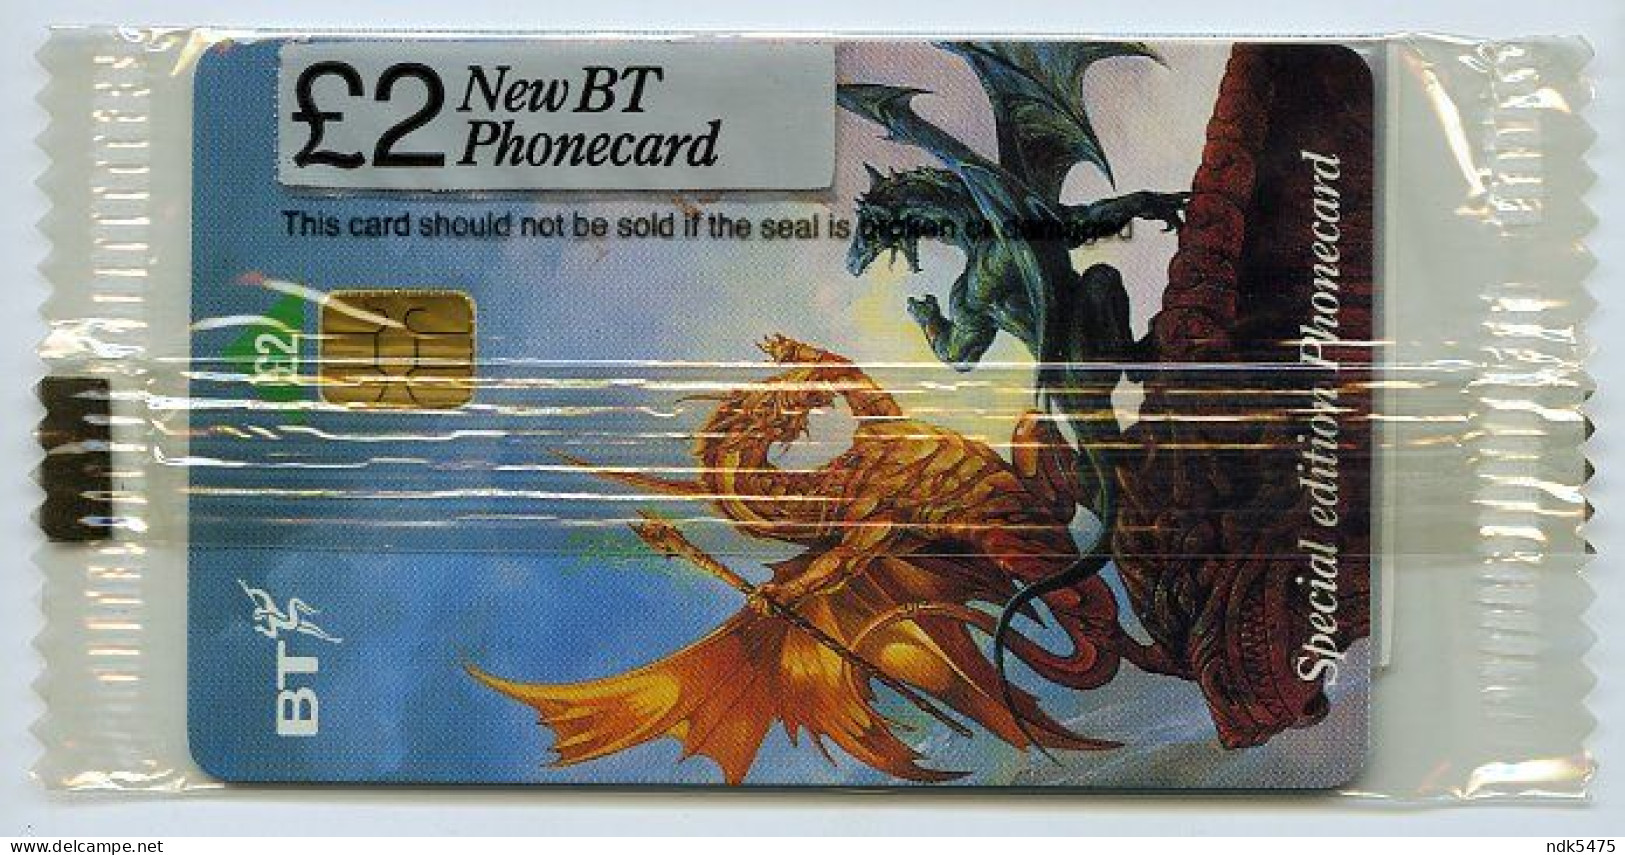 BT PHONECARD : DRAGONS OF SUMMER FLAME : £2 - BT Promotional